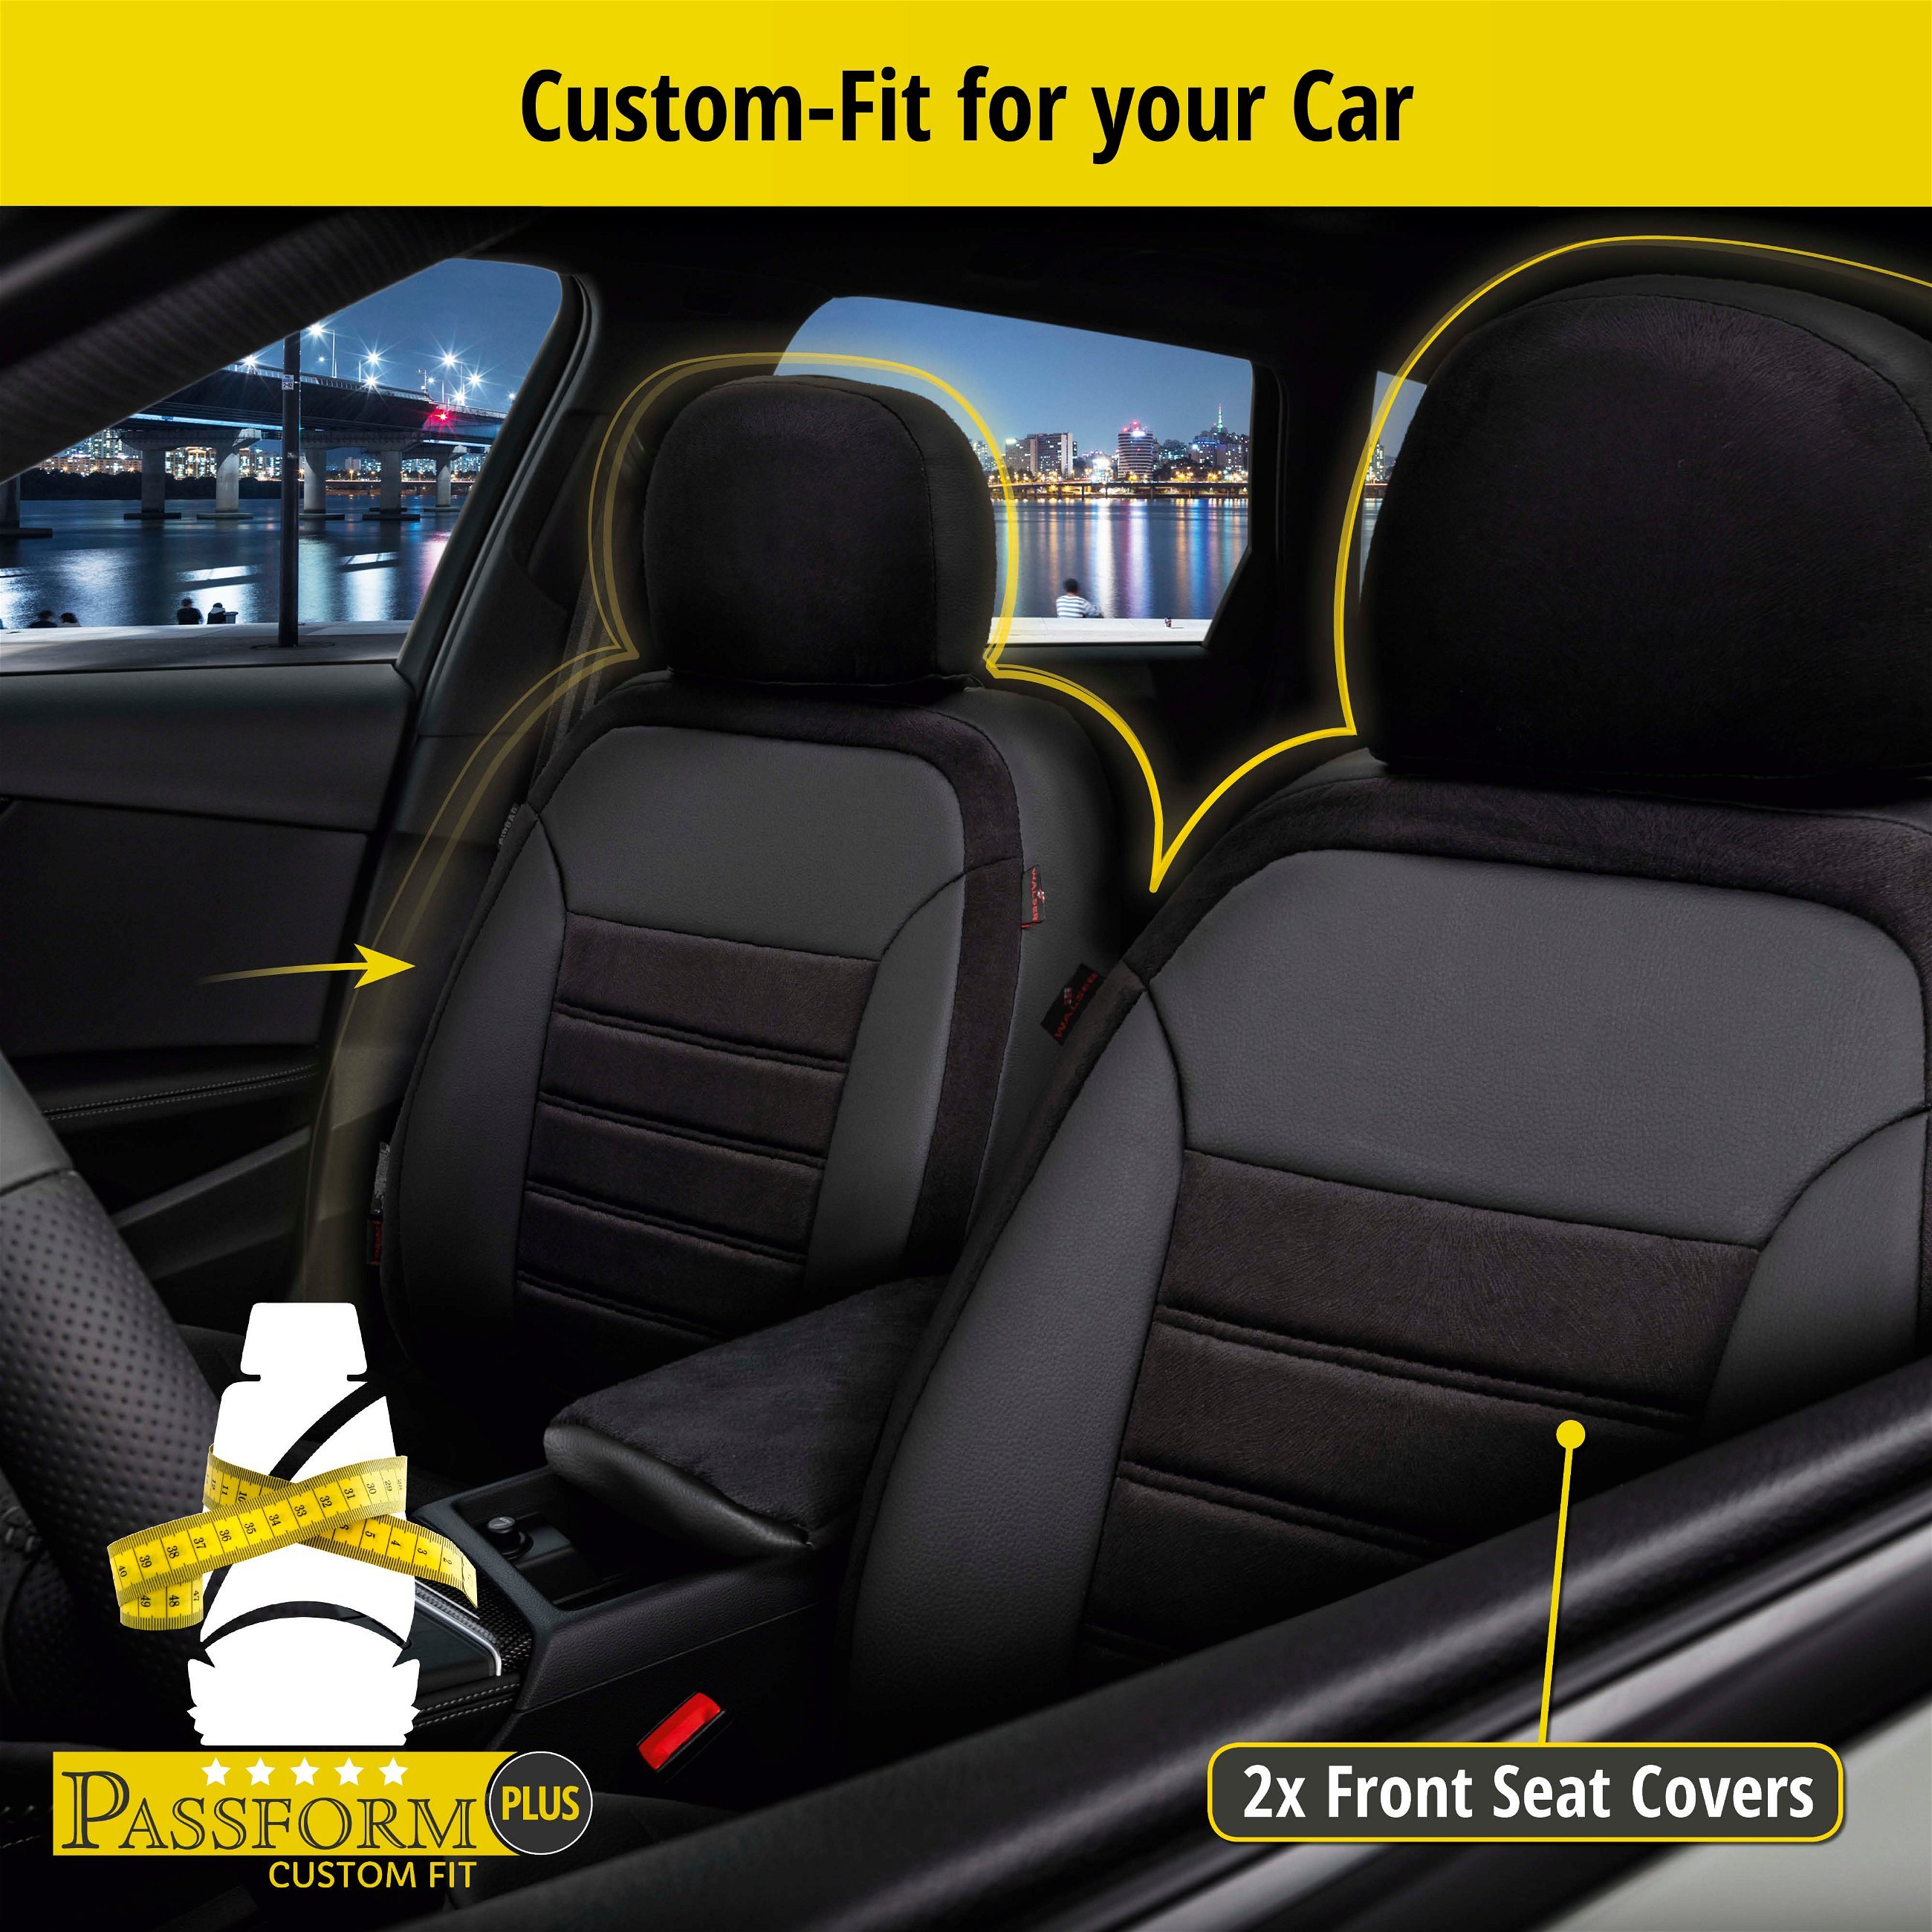 Seat Cover Bari for Skoda Karoq (NU7) 07/2017-Today, 2 seat covers for normal seats